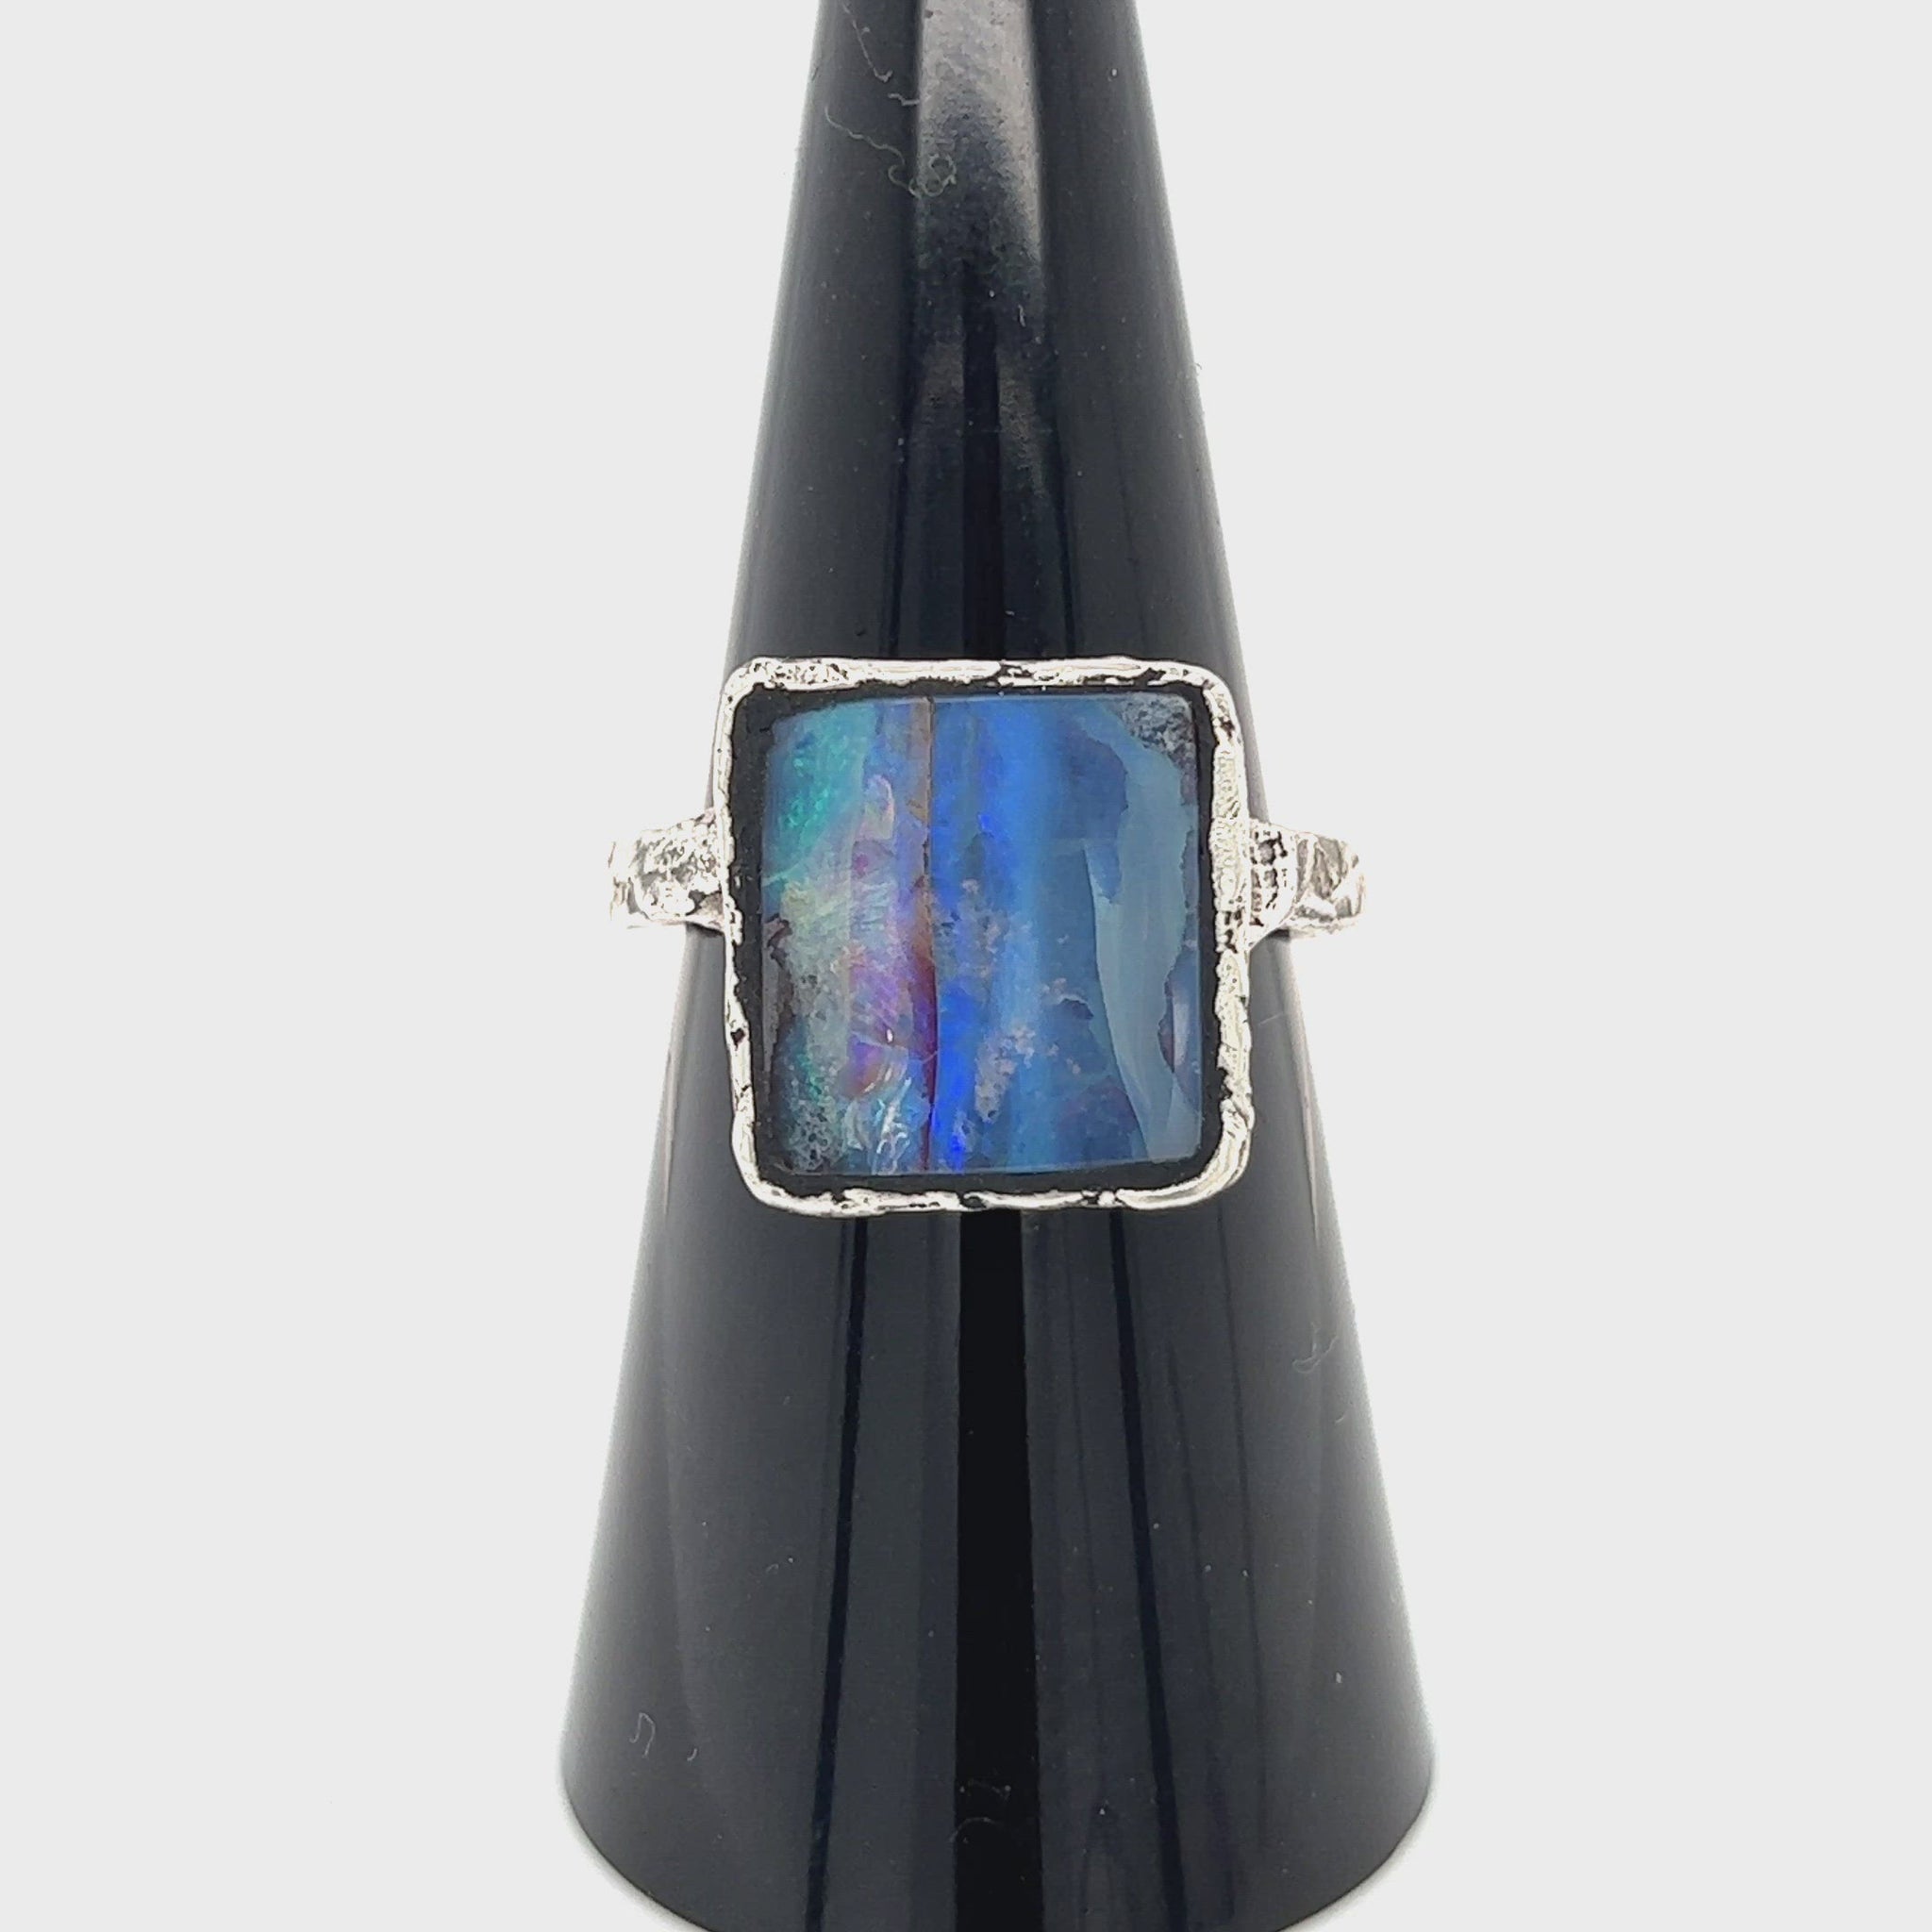 Beautiful square cut Queensland Boulder opal displaying impressive colours. Hand crafted by our talented Queensland Silversmith using Argentium silver.